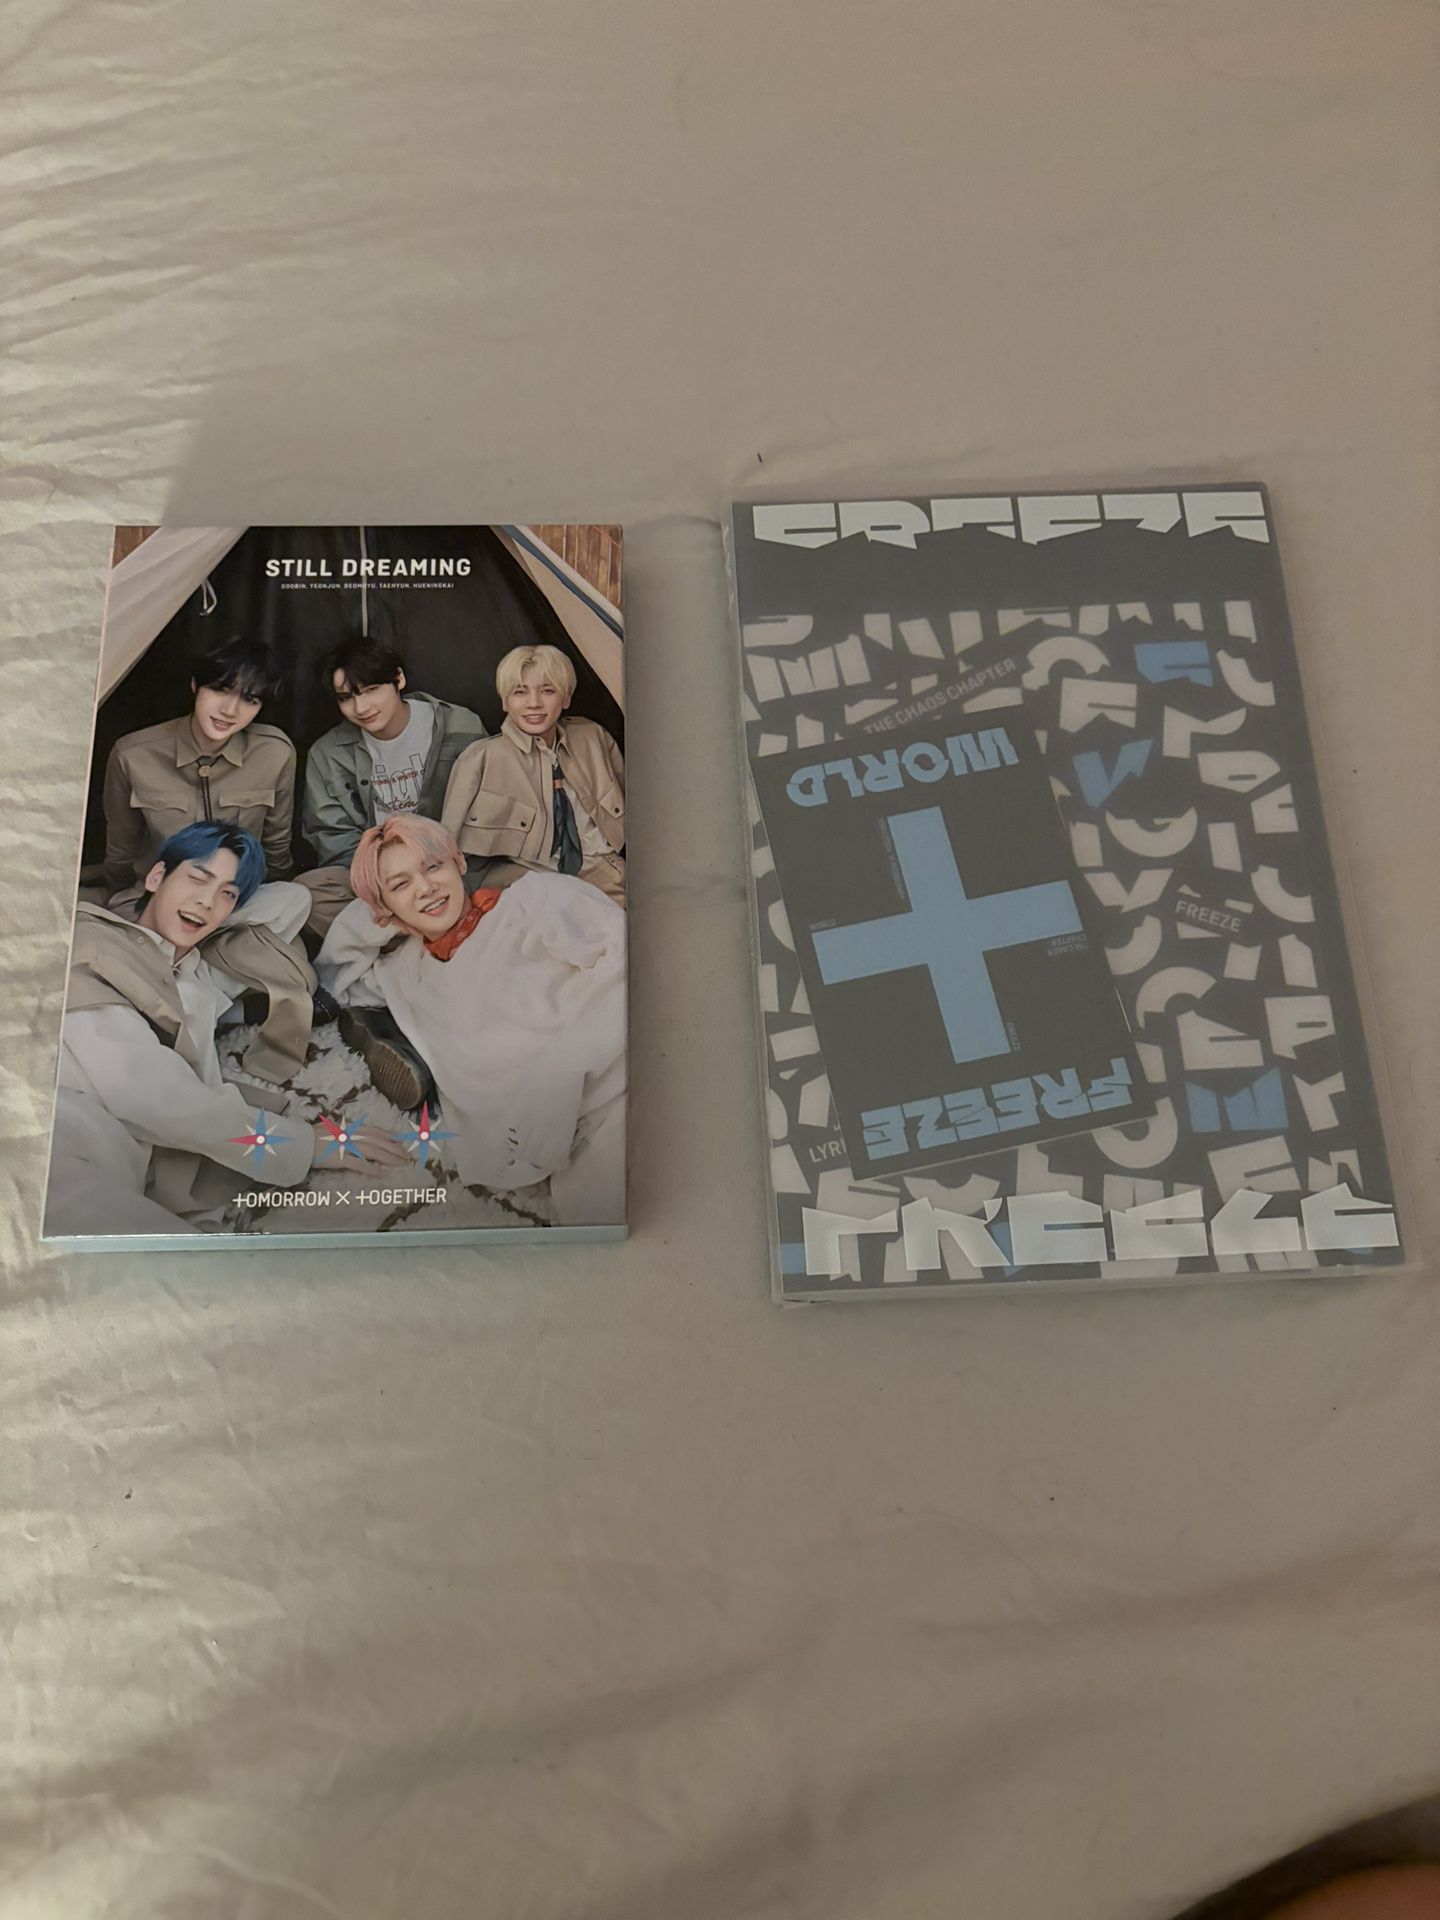 KPOP TXT Albums The Chaos Chapter And Still Dreaming